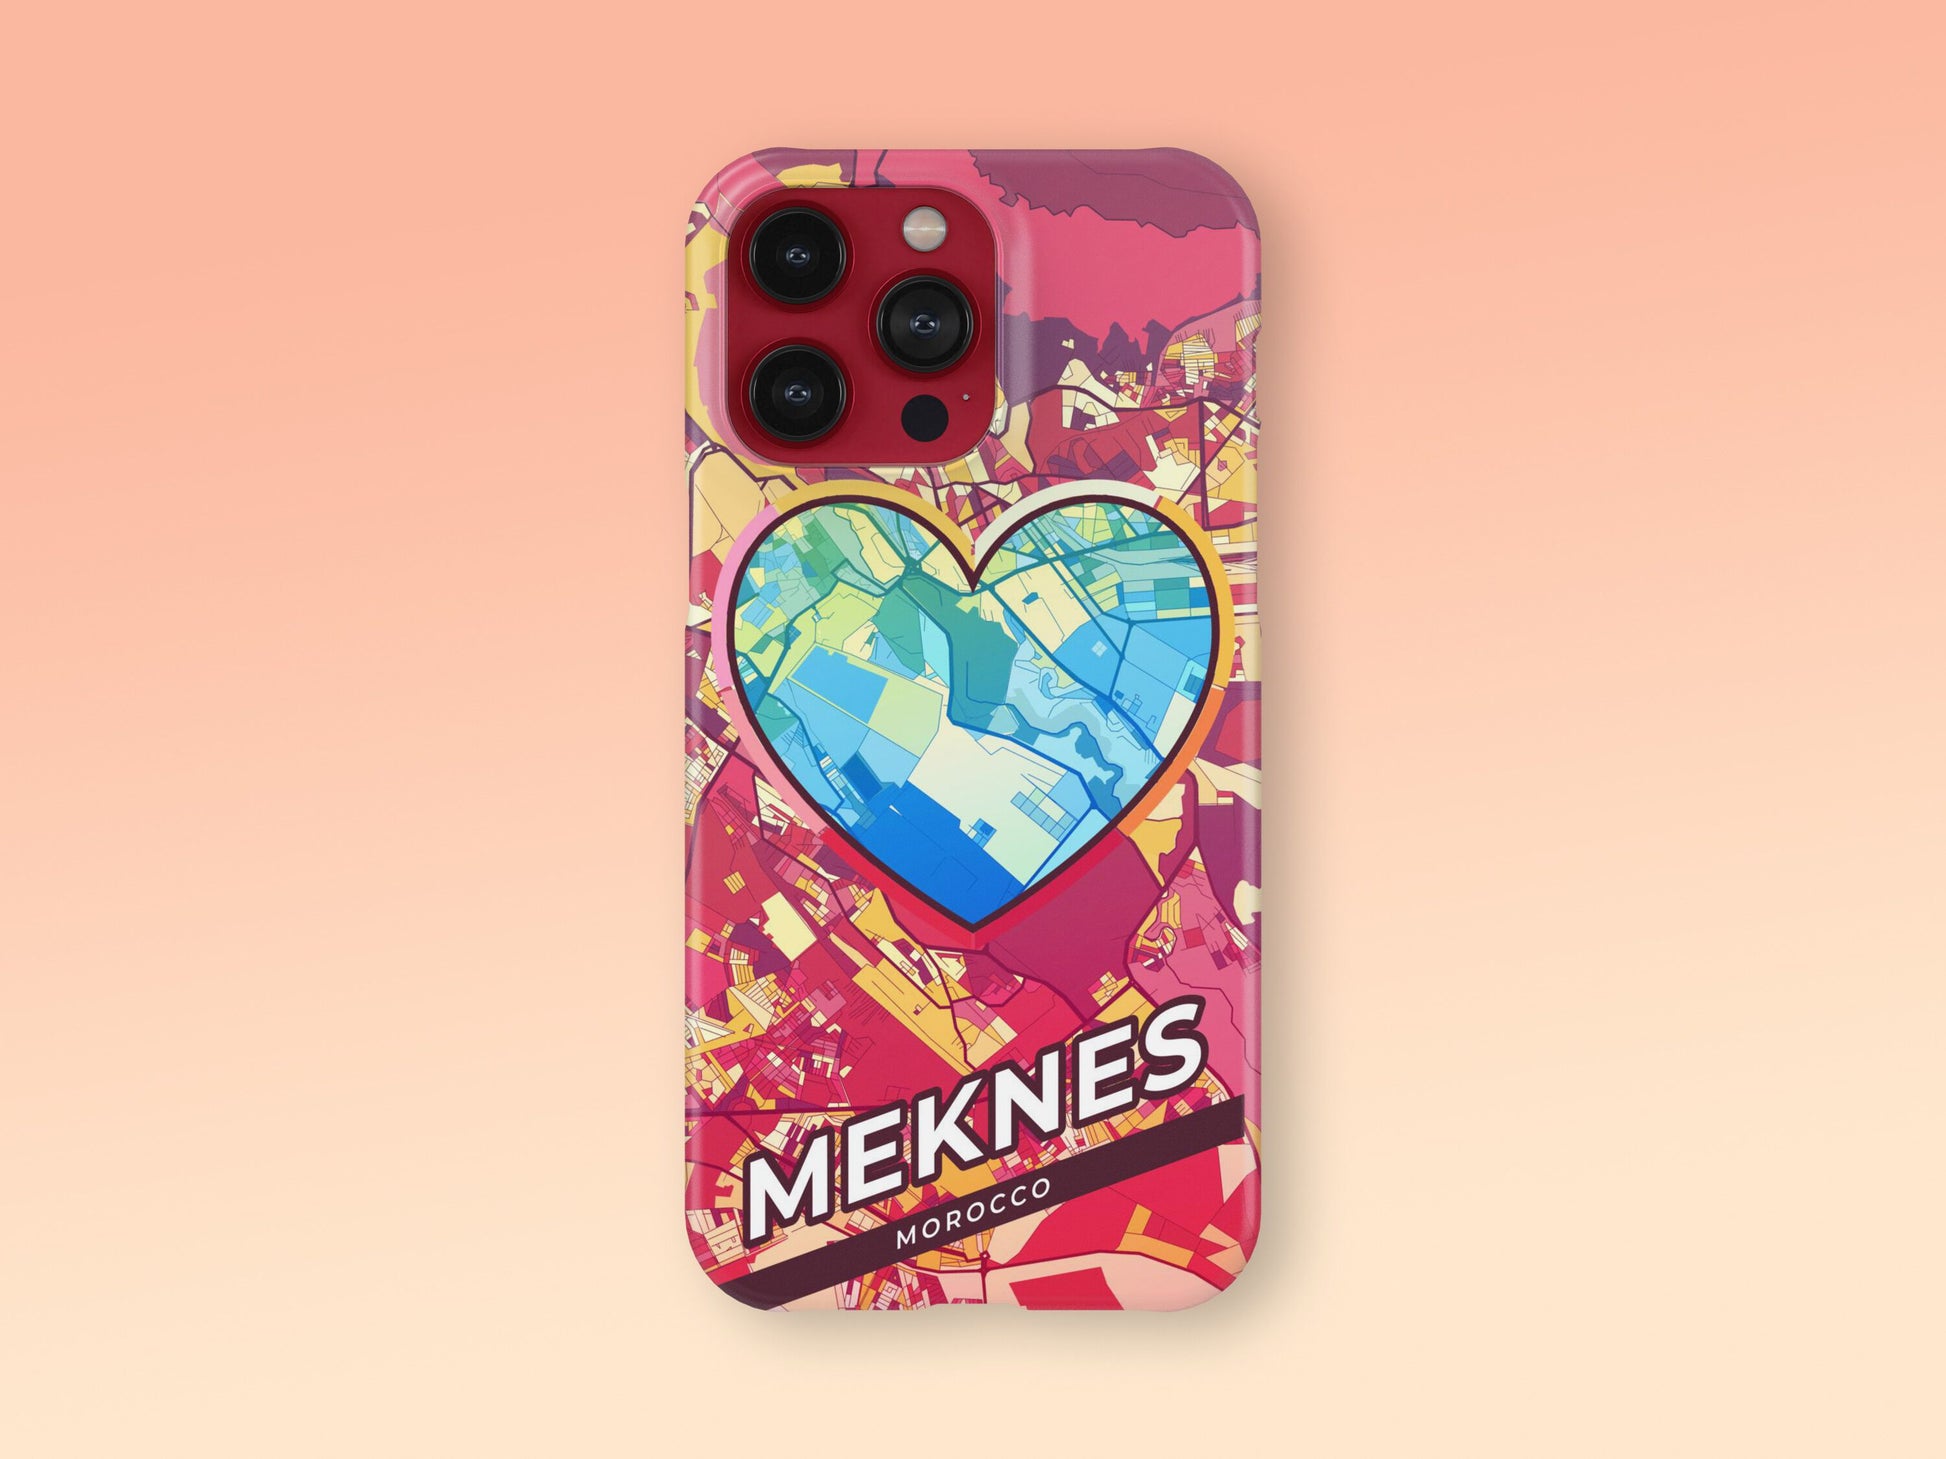 Meknes Morocco slim phone case with colorful icon 2